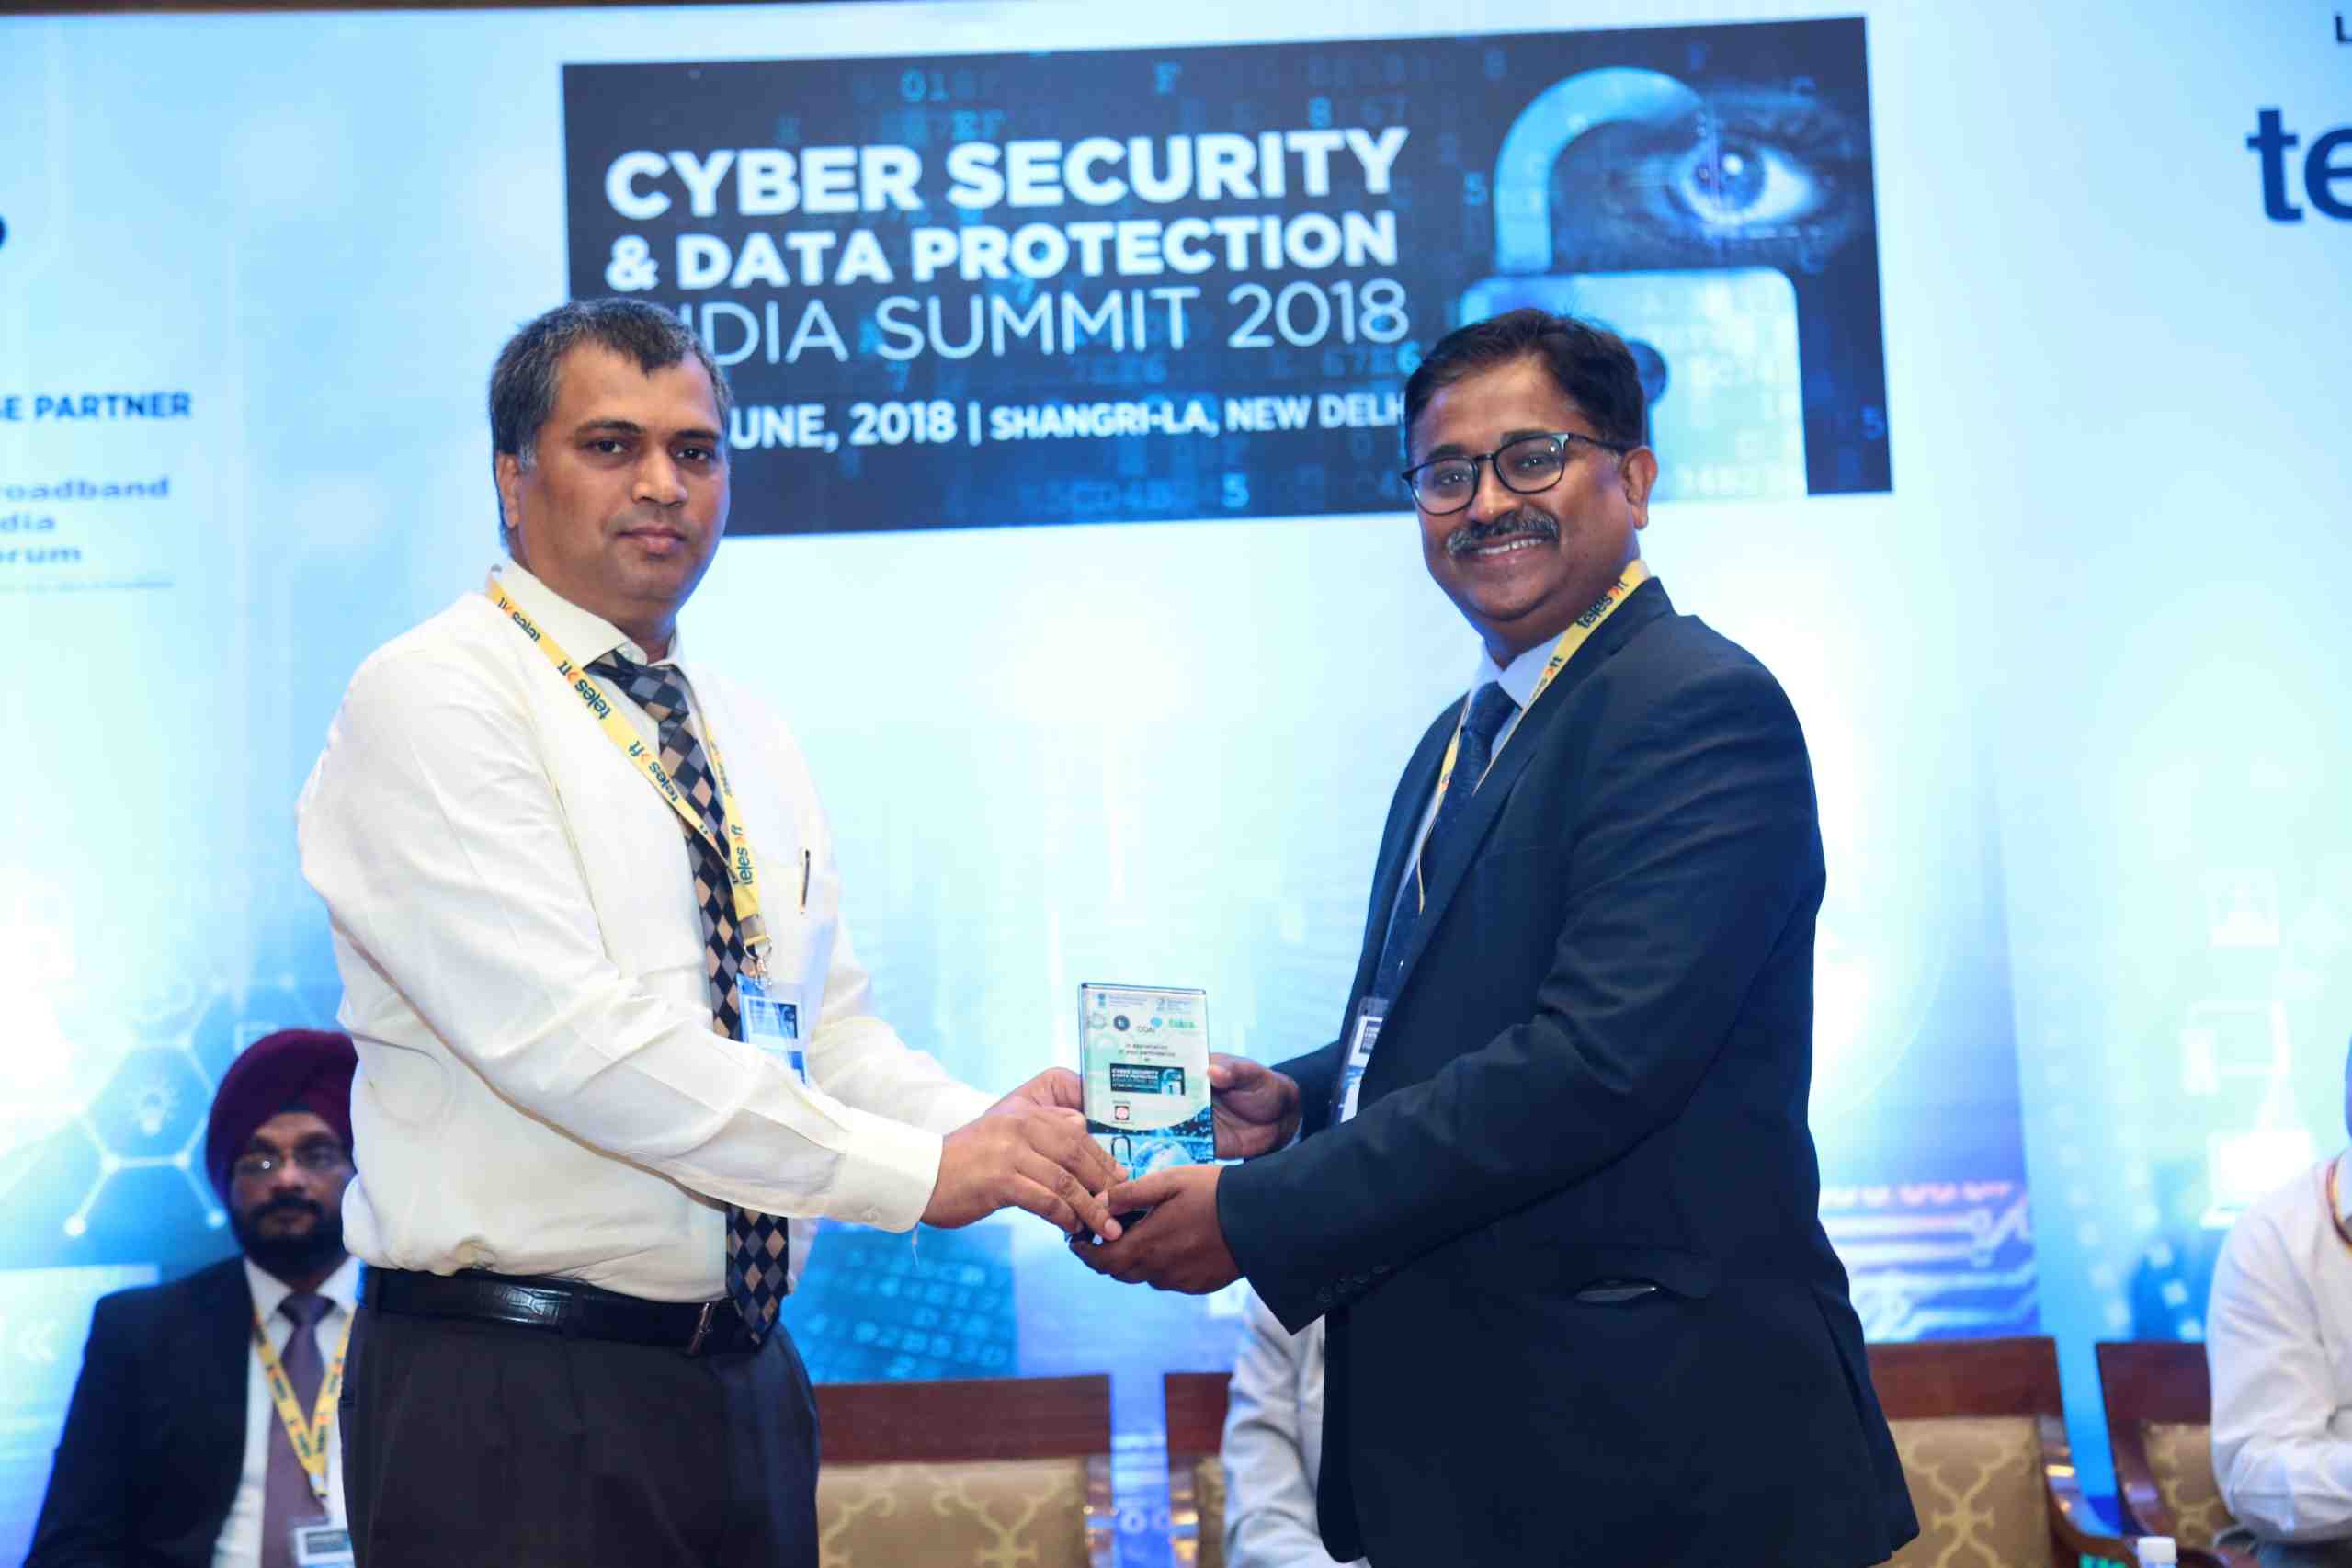 Cyber Security & Data Protection India 2018